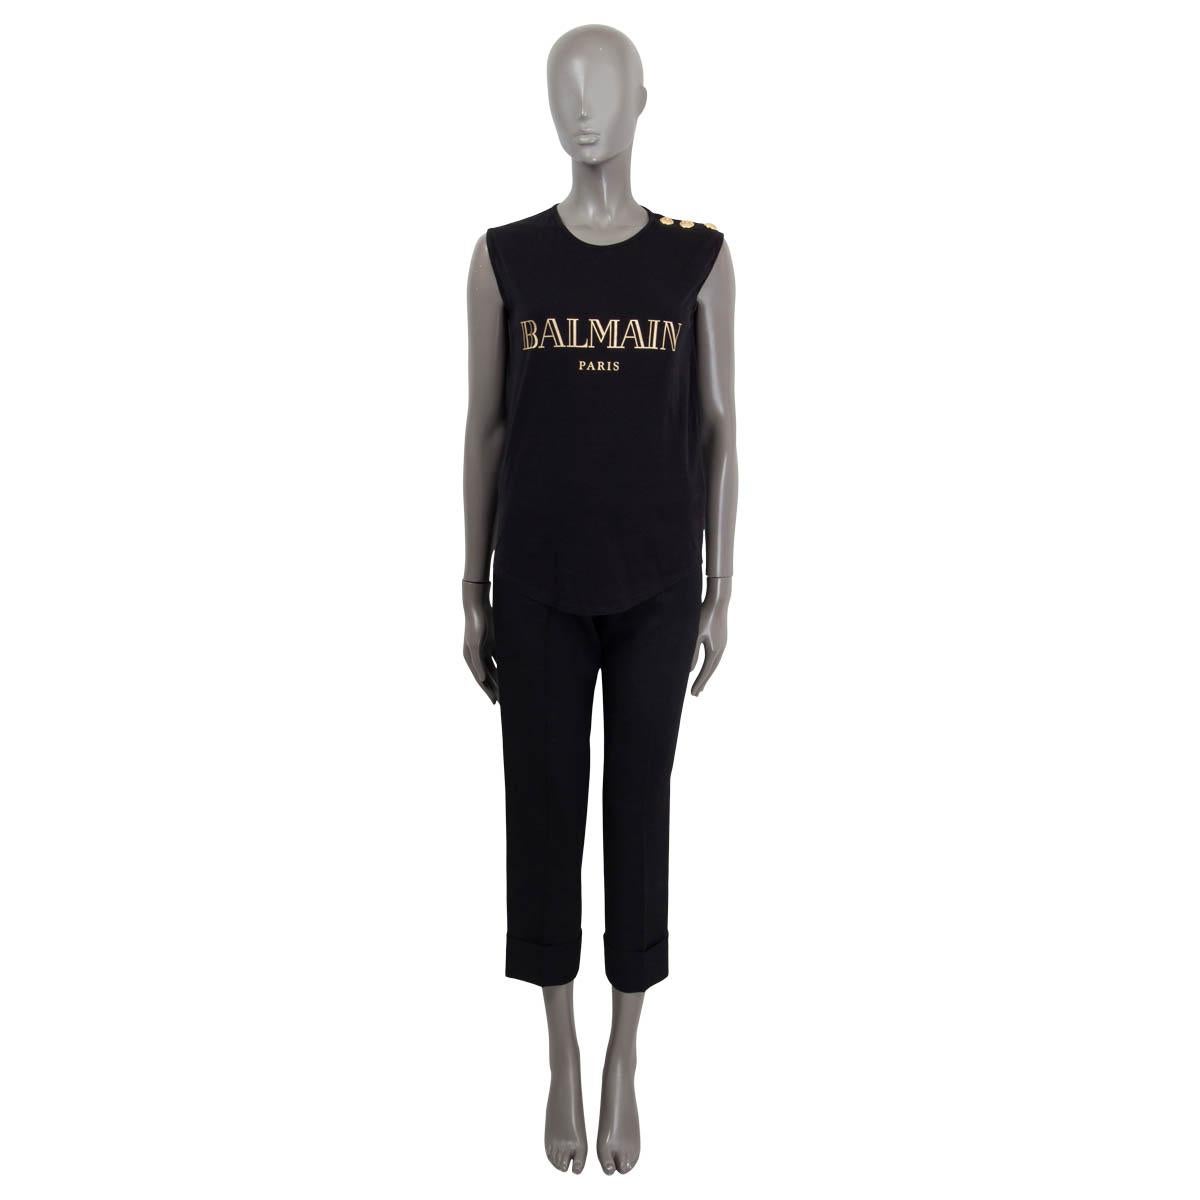 100% authentic Balmain logo print tank top in black cotton (100%). Features faux lion buttons on the shoulder. Unlined. Has been worn and is in excellent condition.

Measurements
Tag Size	36
Size	XS
Bust	86cm (33.5in) to 106cm (41.3in)
Waist	84cm